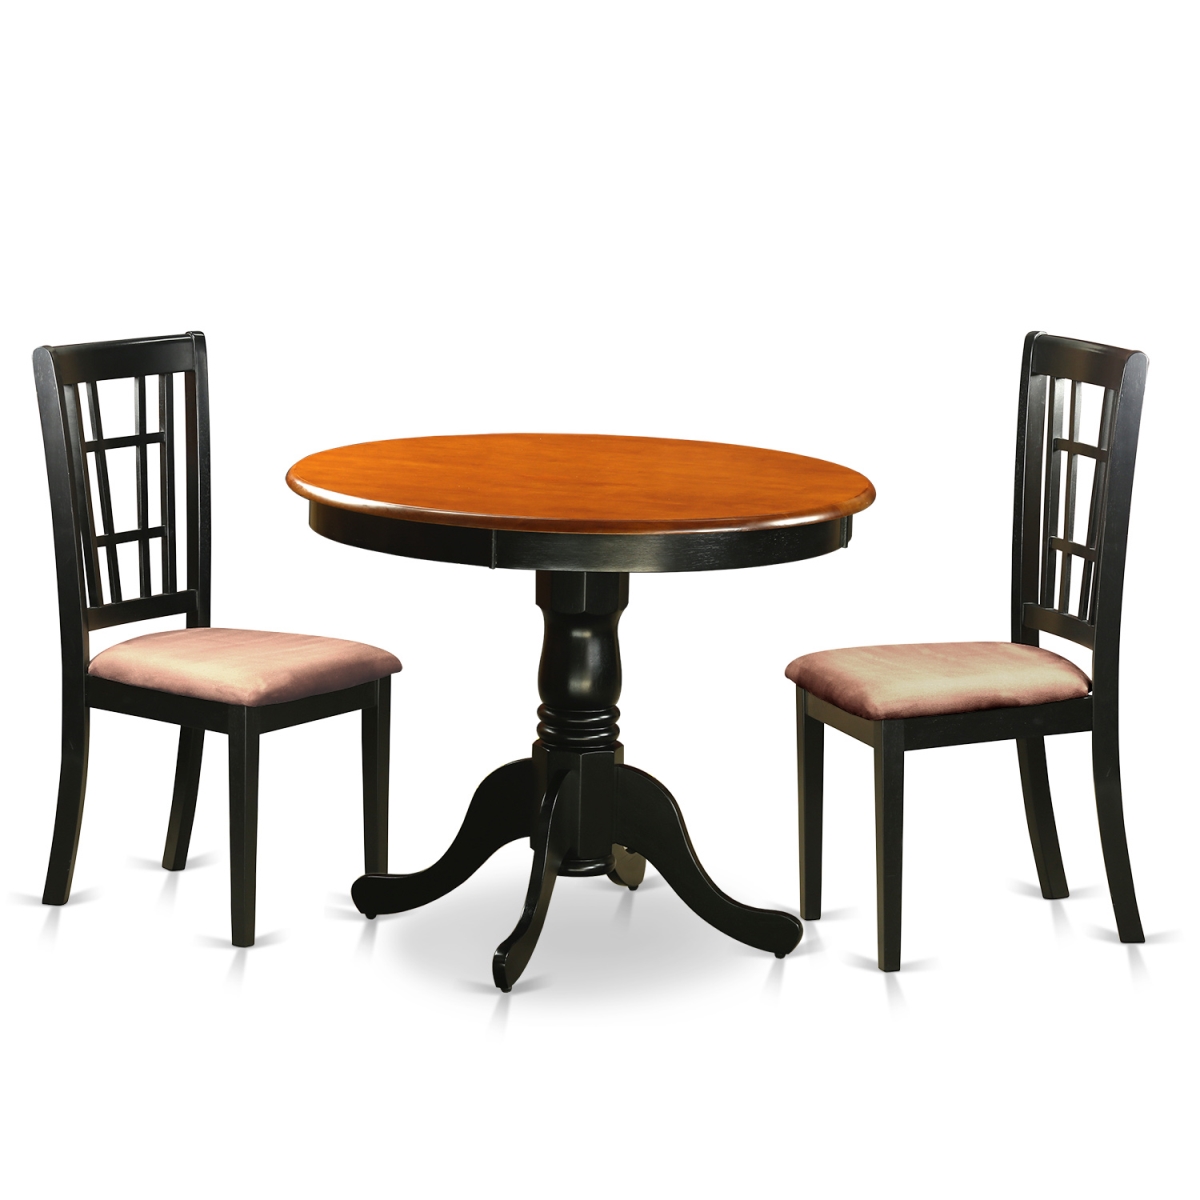 Picture of East West Furniture ANNI3-BLK-C Dining Table with 2 Microfiber Chairs, Black & Cherry - 3 Piece